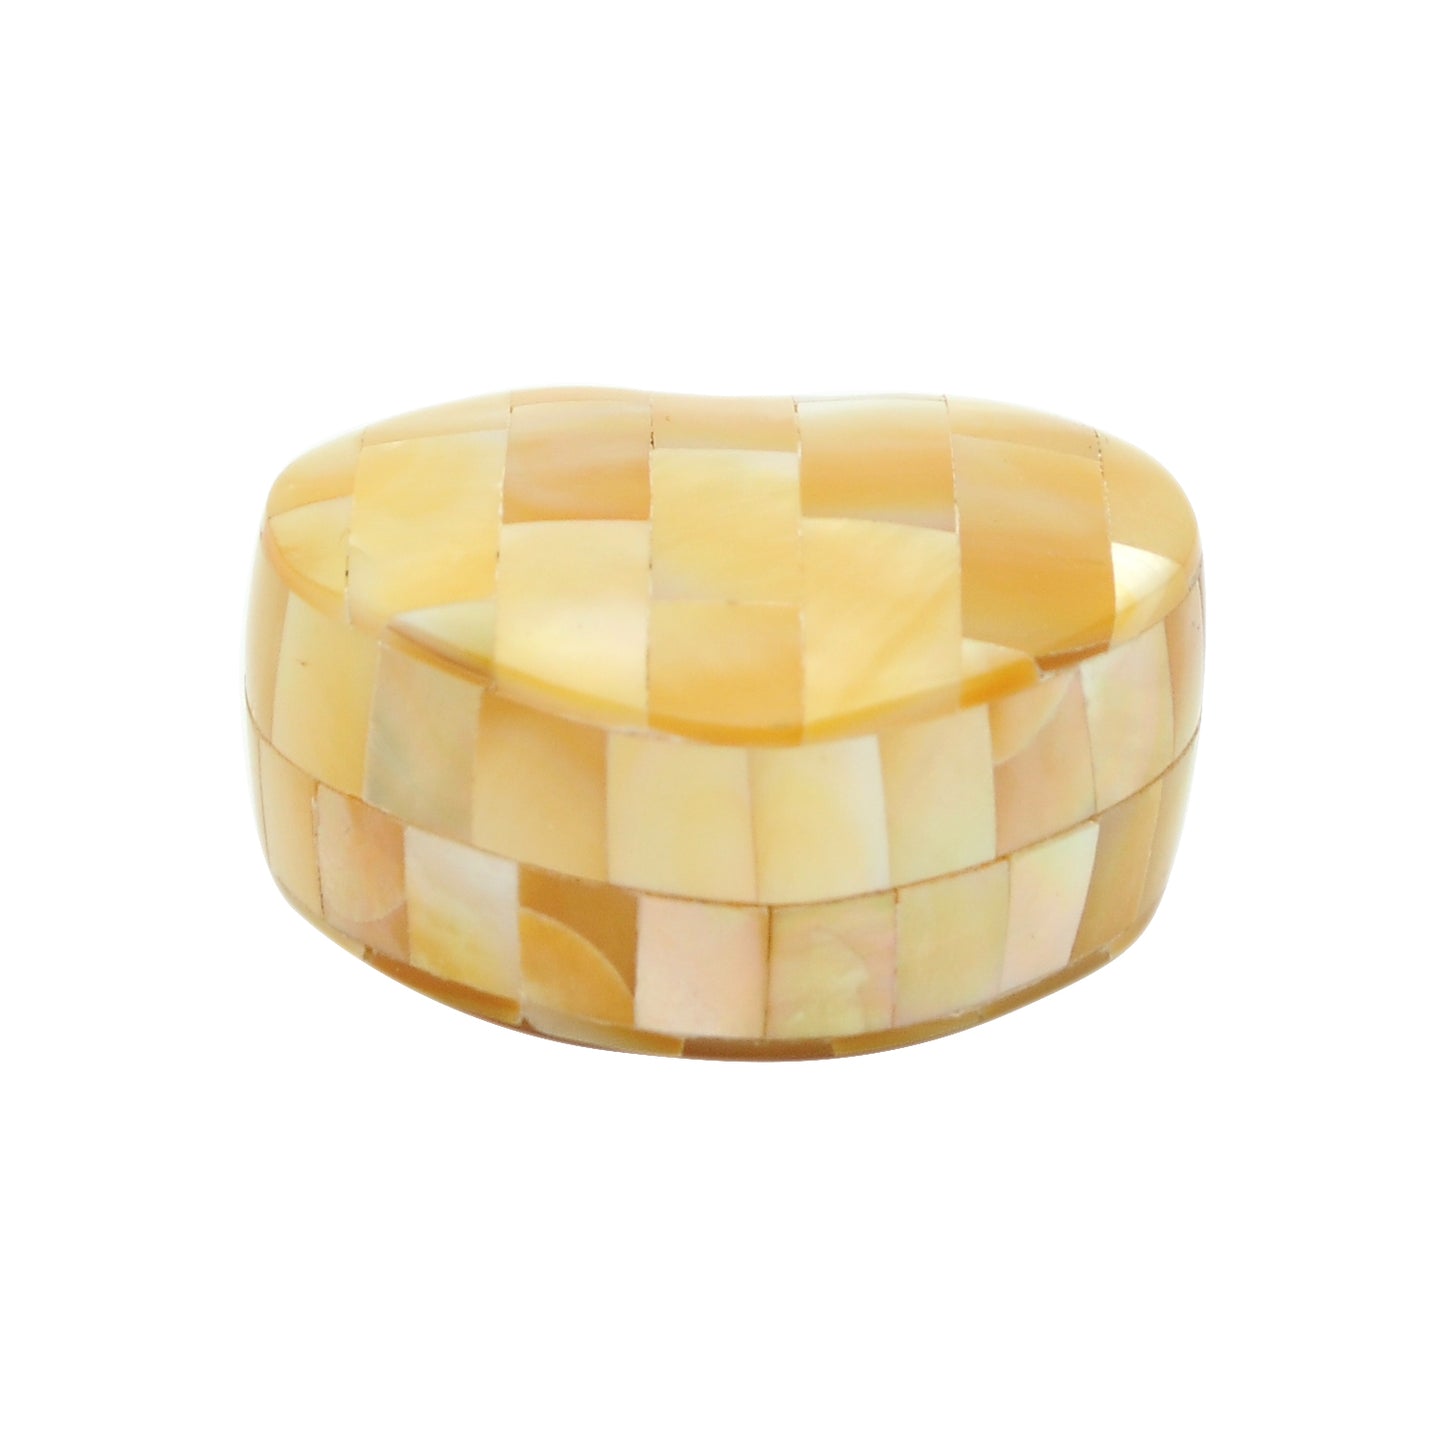 Myanmar Natural Mother of Pearl Jewelry Box Ring Bracelet Necklace Case